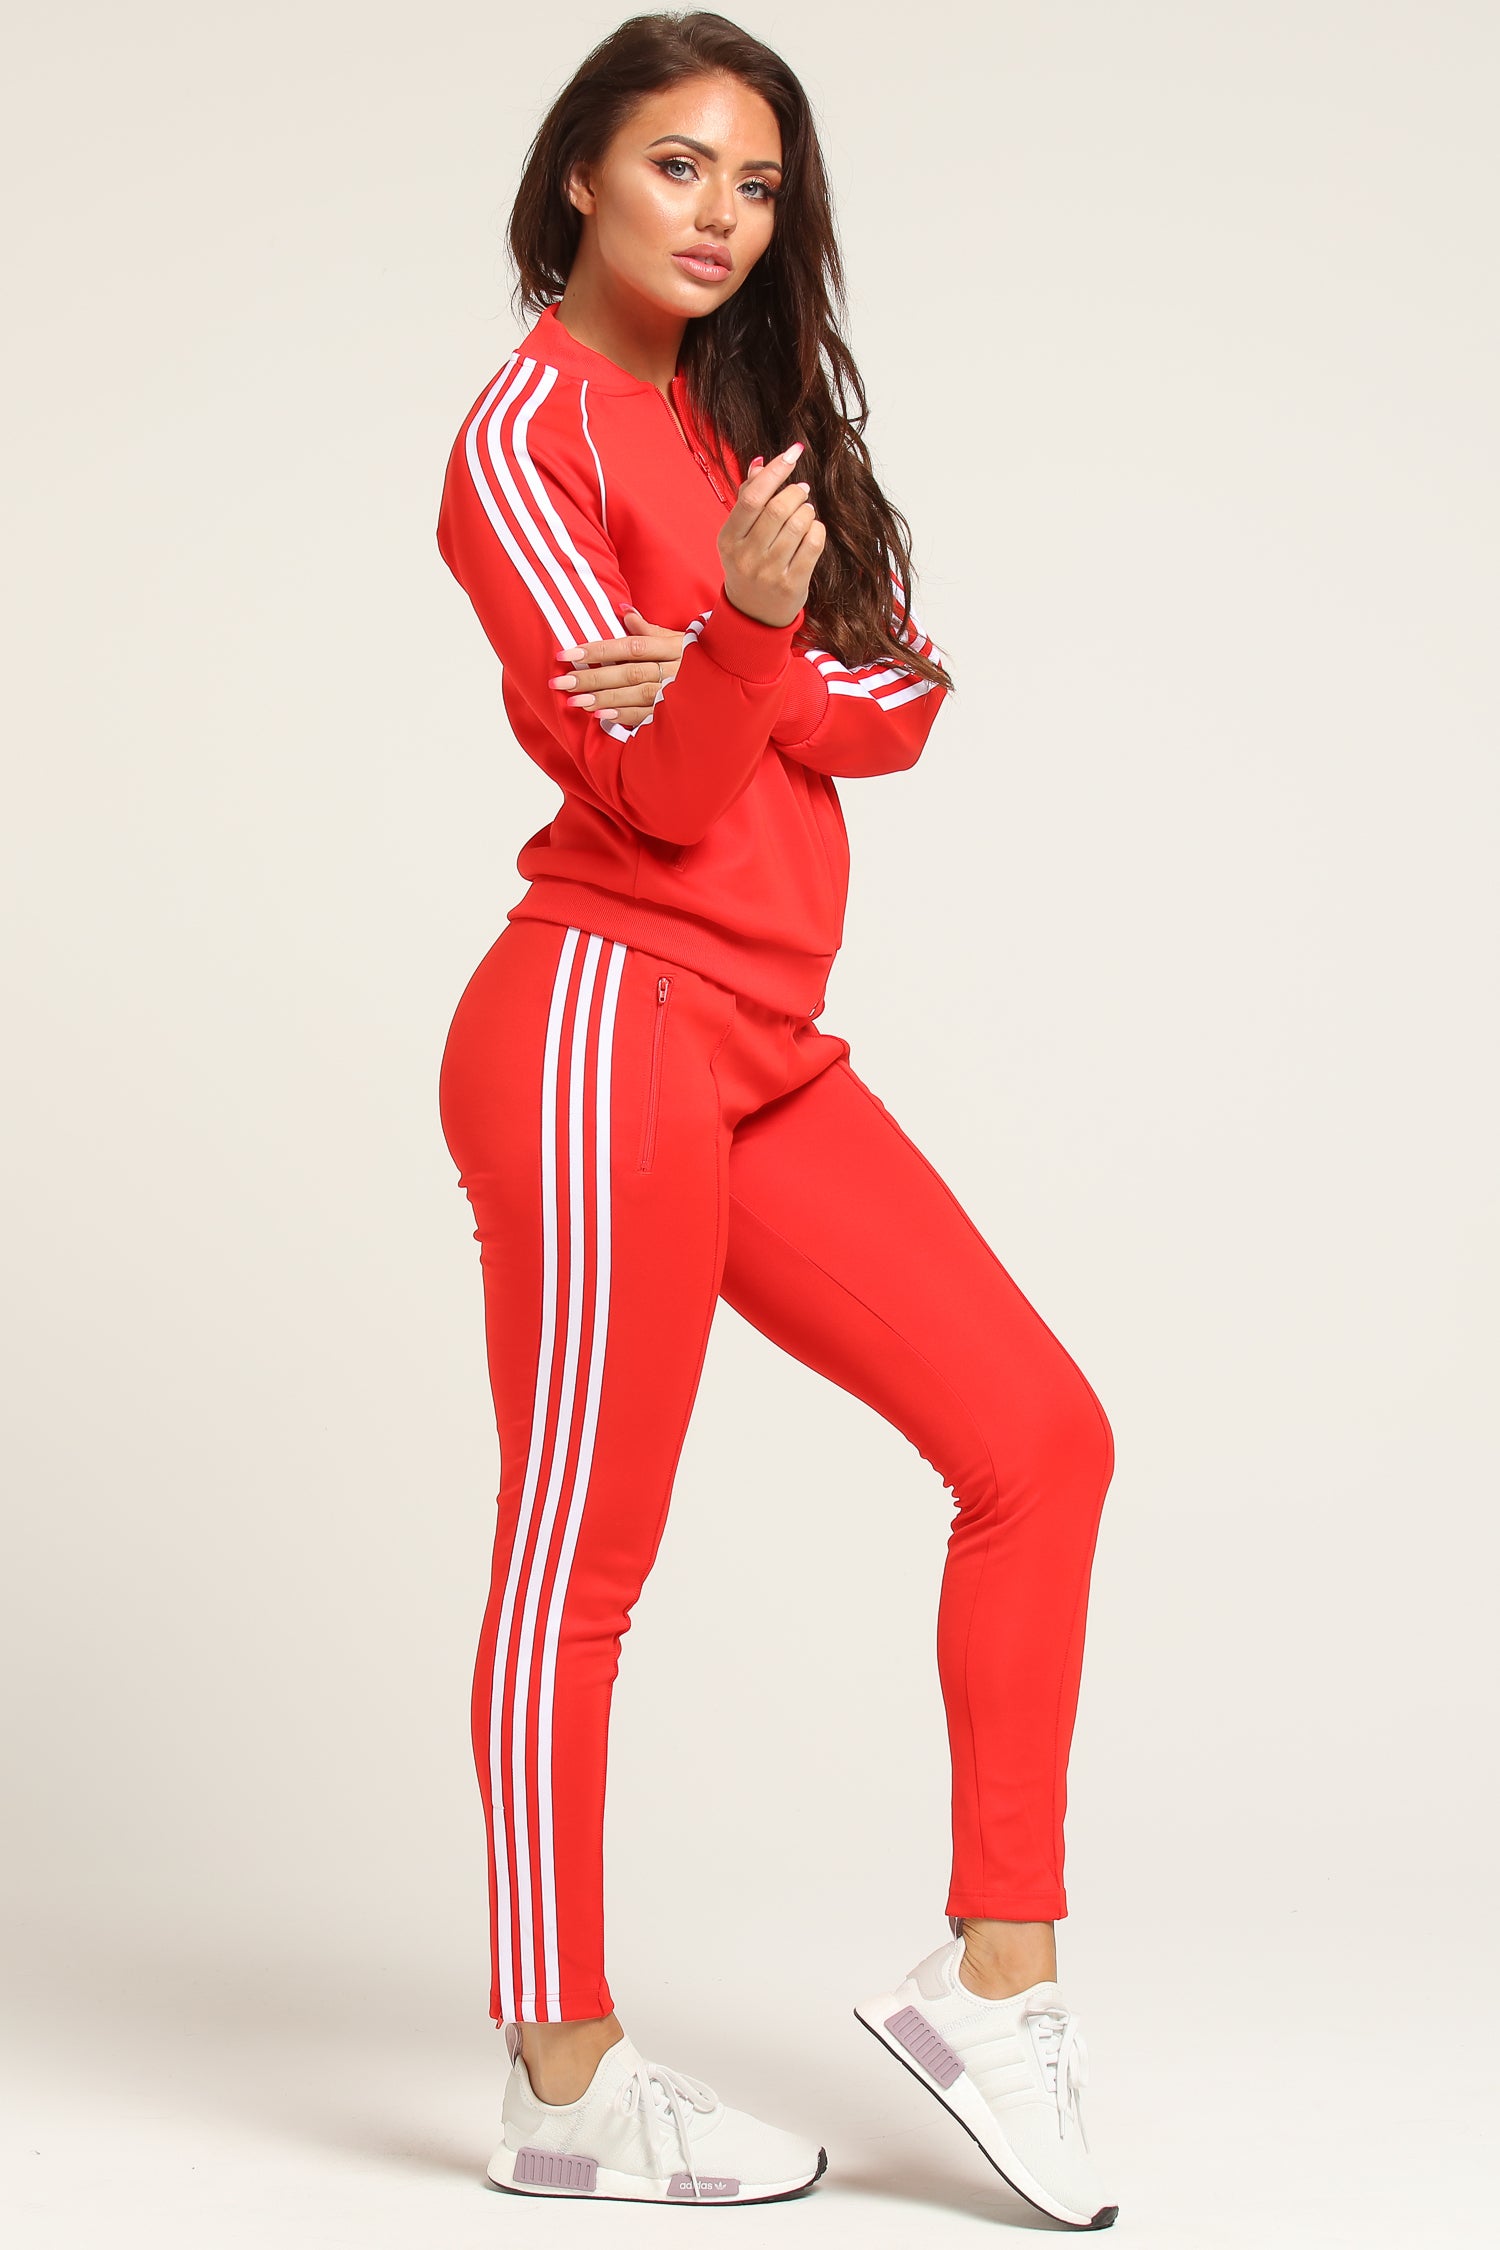 adidas track pants women red